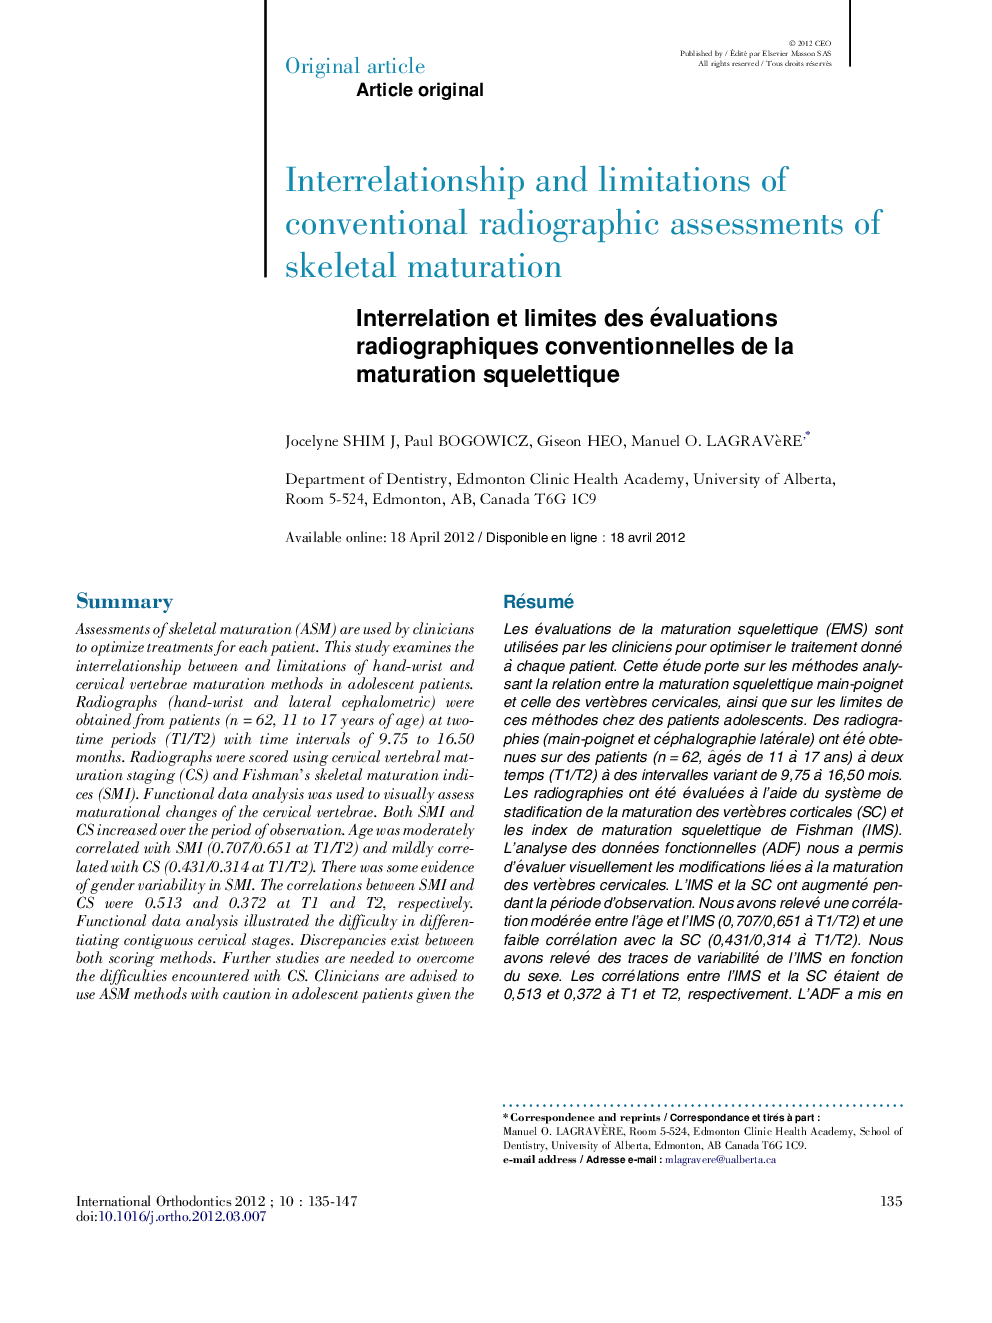 Interrelationship and limitations of conventional radiographic assessments of skeletal maturation